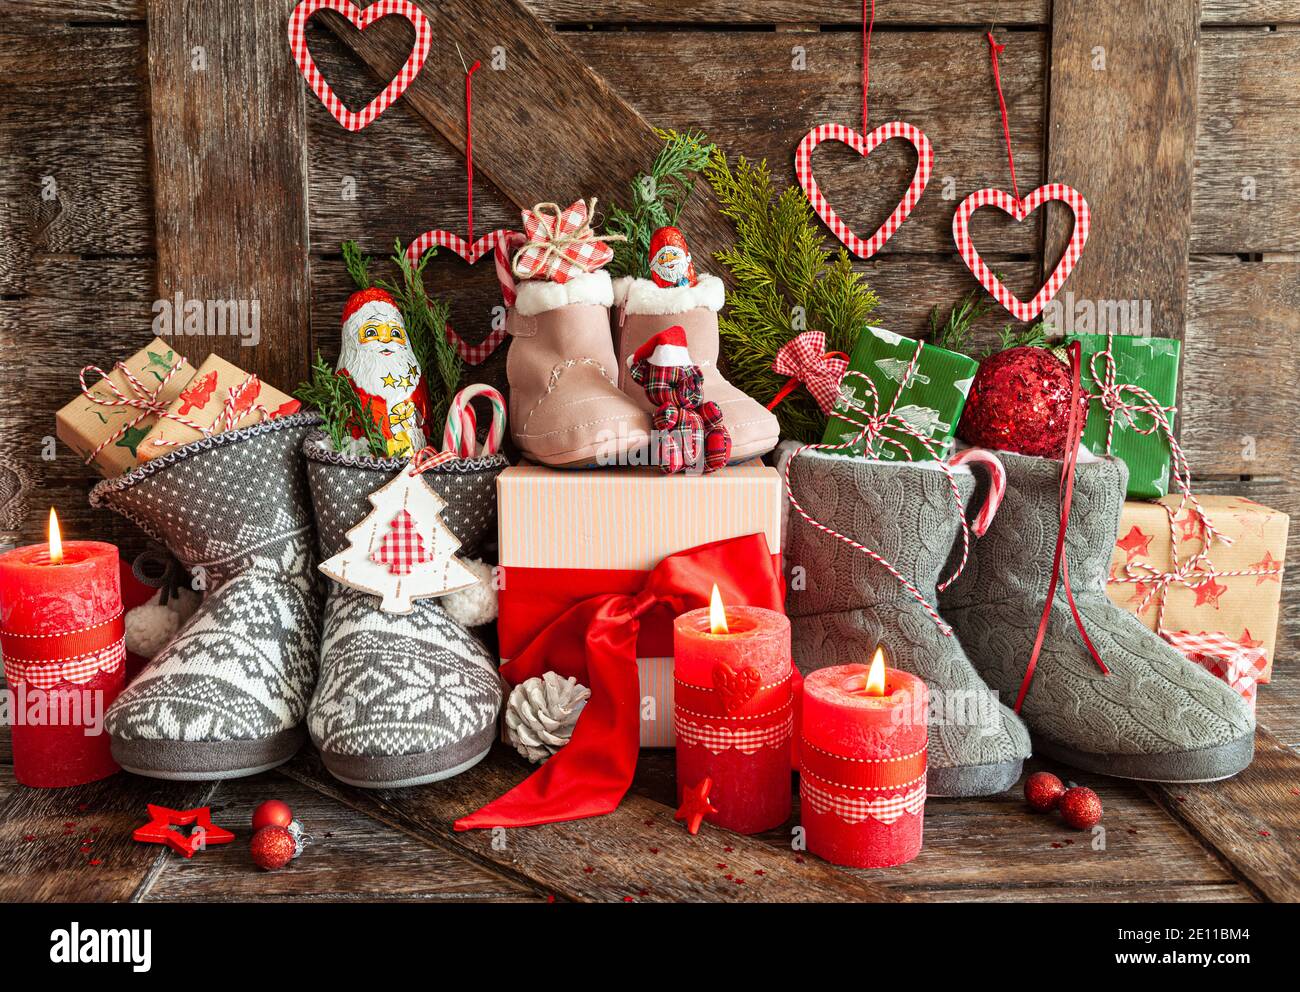 Knitted Boots With Candy And Christmas Presents Stock Photo